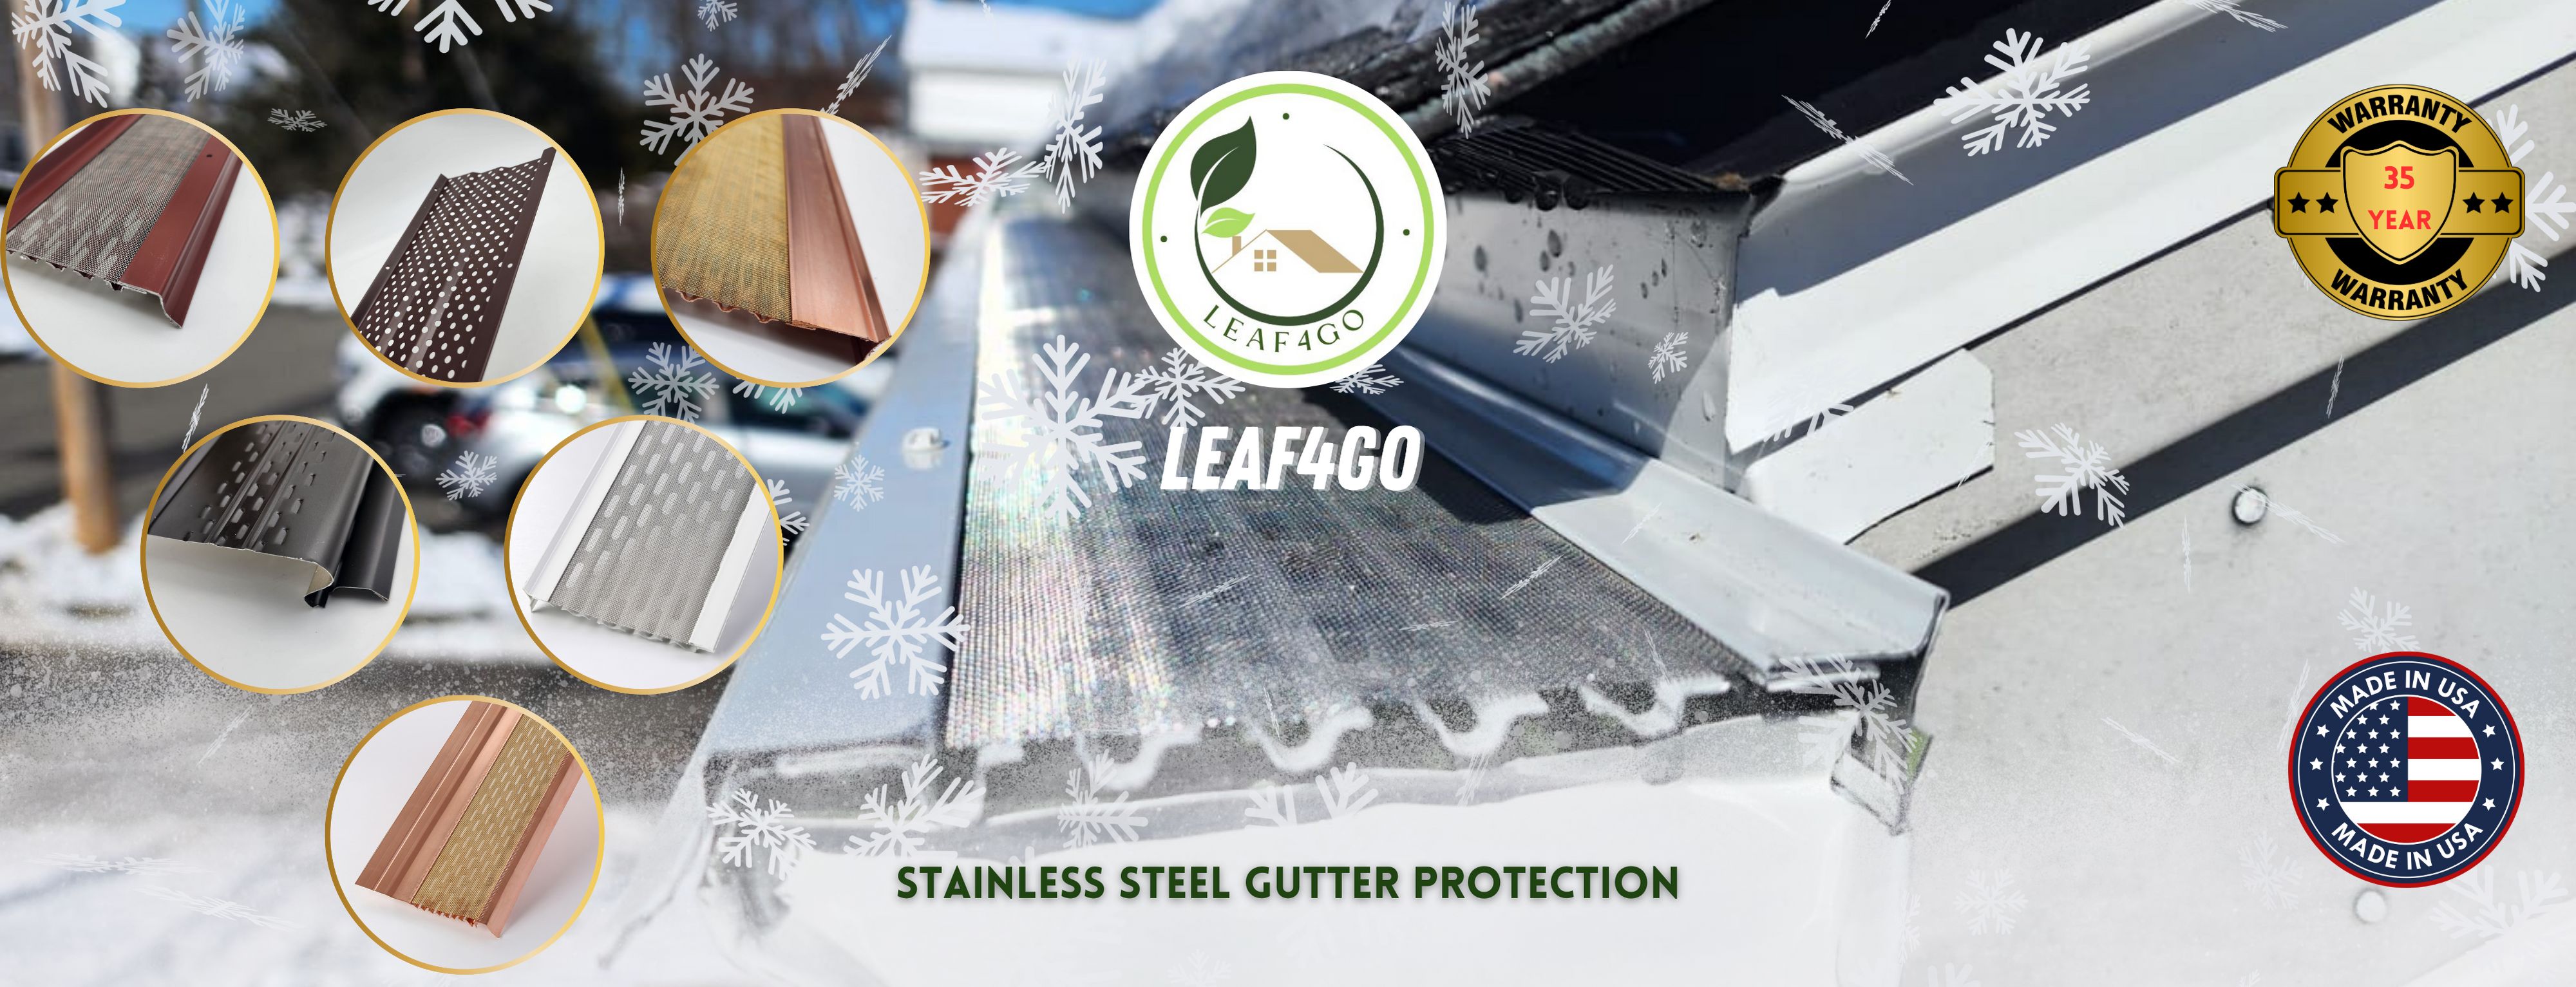 Install copper Leaf4go-Pro Gutter Guards to your home or venue. Enjoy peace of mind with never having to deal with gutter clogging ever .Gutter Guards for 5" half round copper gutter systemsCOPPER-Leaf4Go-PRO Gutter Guards - Copper - $17.60 per ft